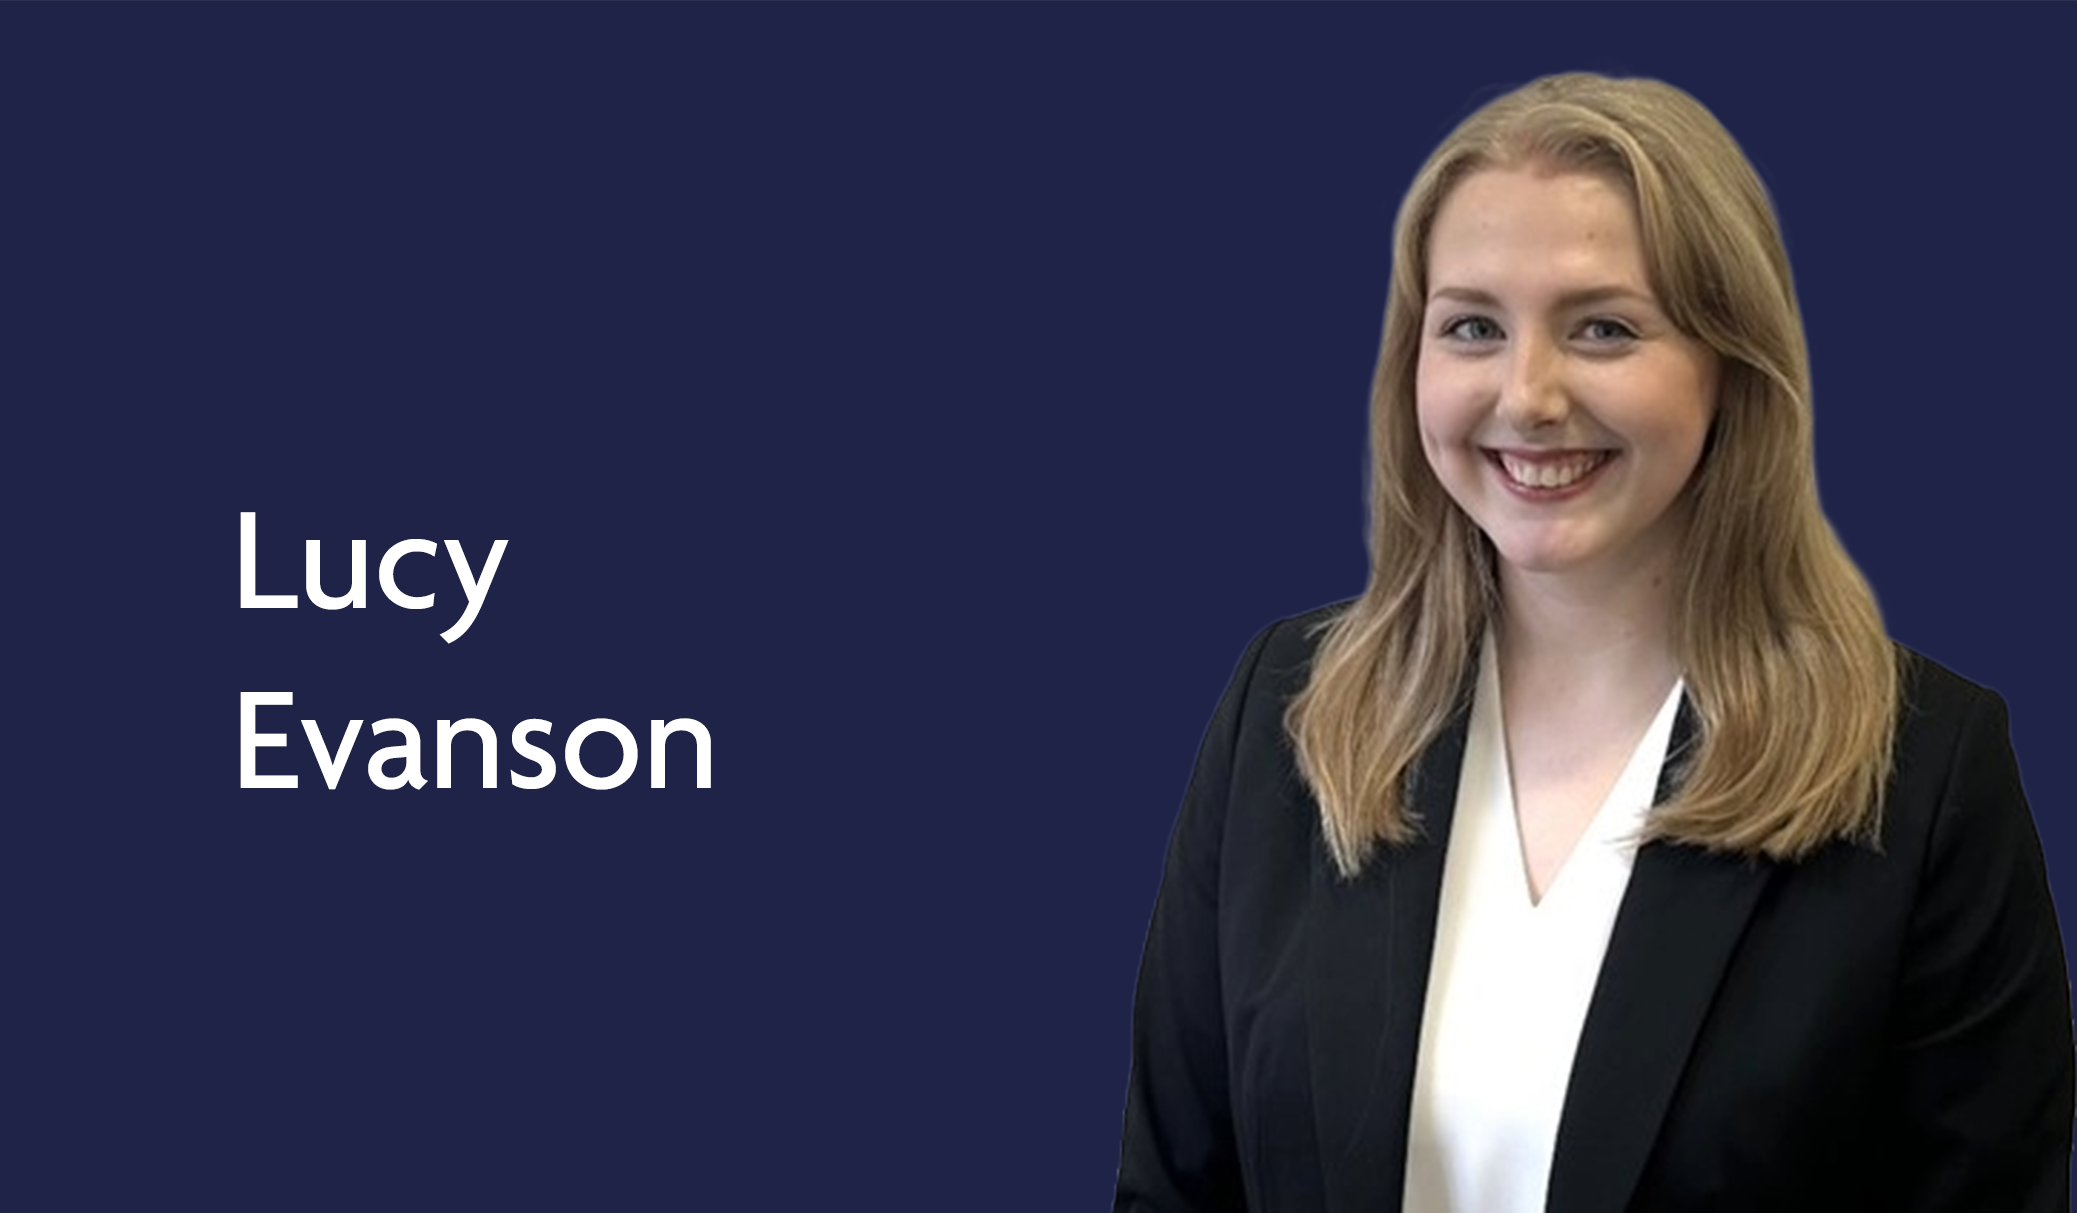 Lucy Evanson – My First Month Of Civil Law Pupillage at Parklane Plowden Chambers